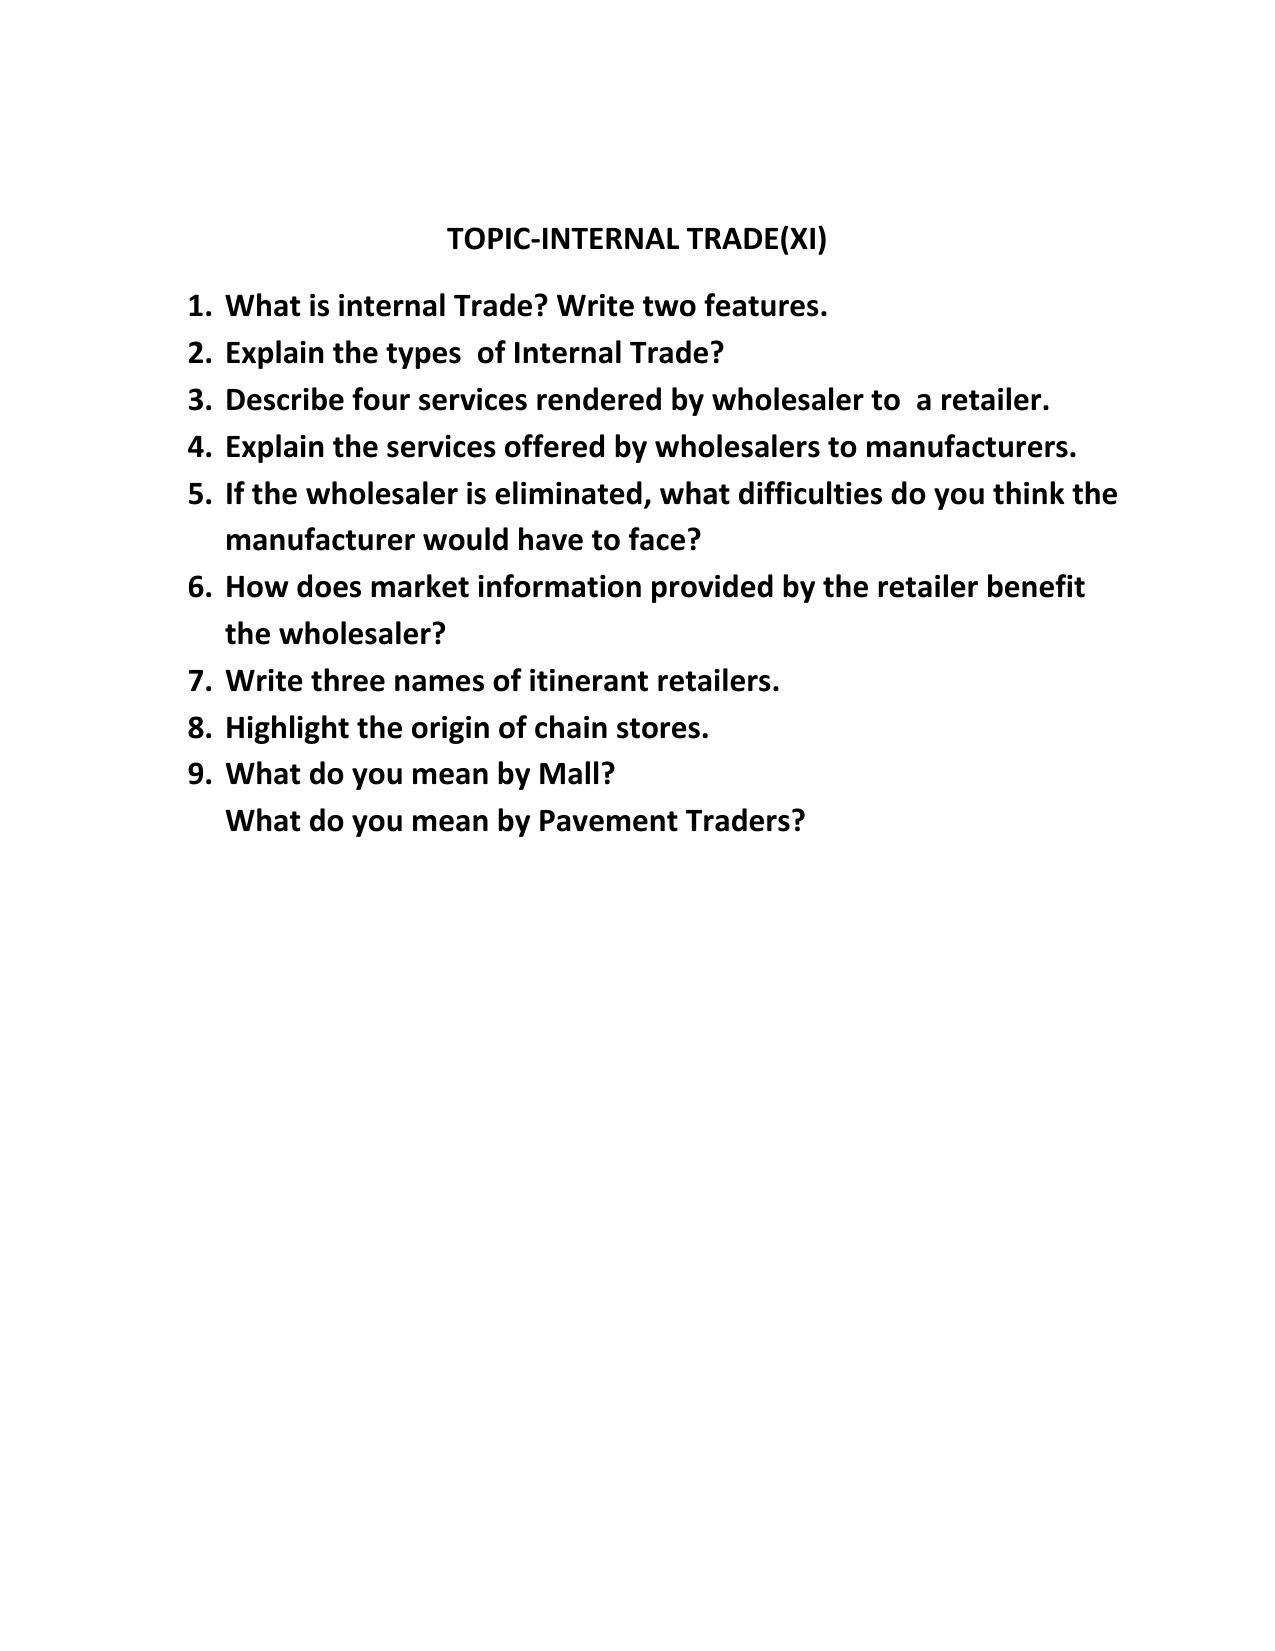 CBSE Worksheets for Class 11 Business Studies Internal Trade Assignment 2 - Page 1